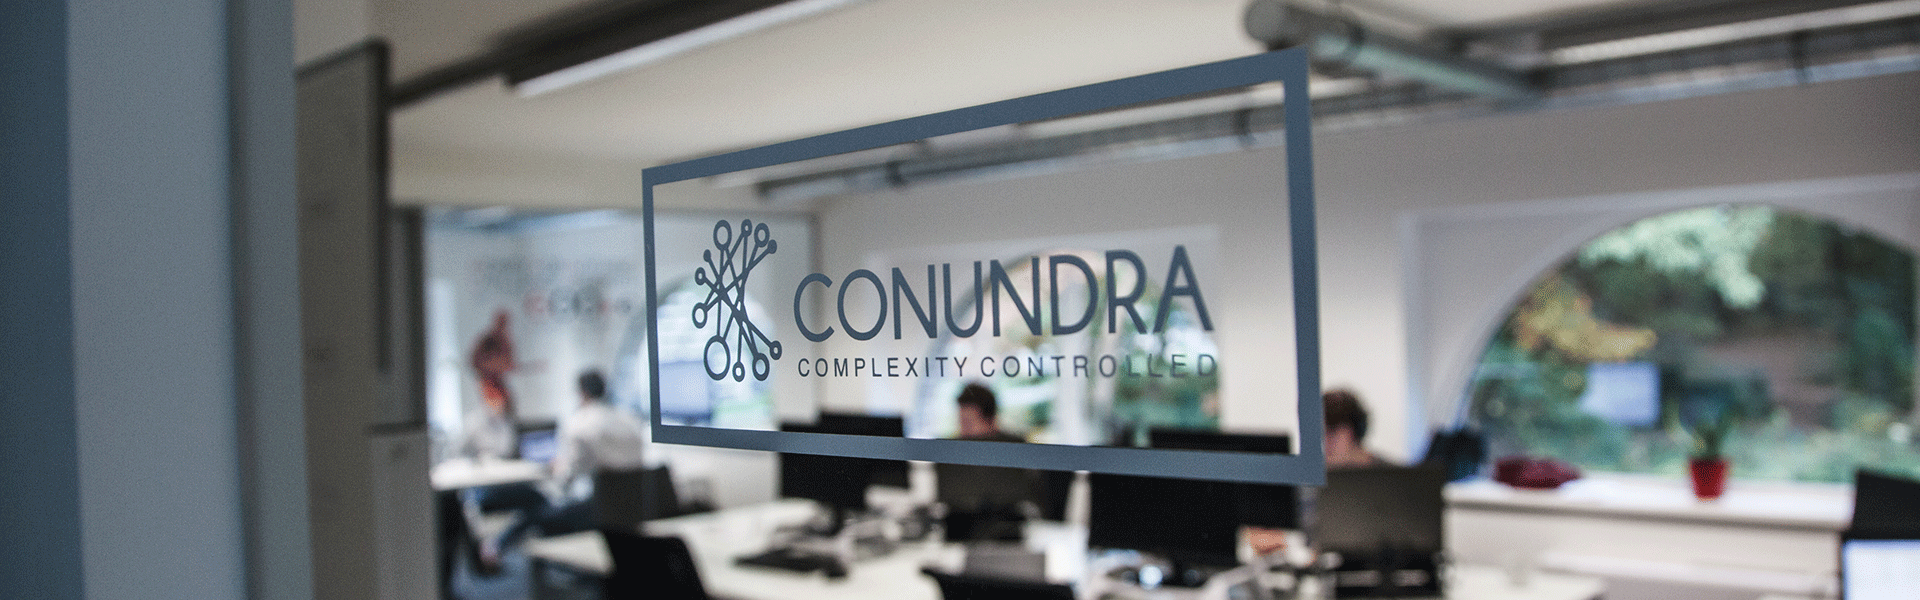 The Conundra Offices